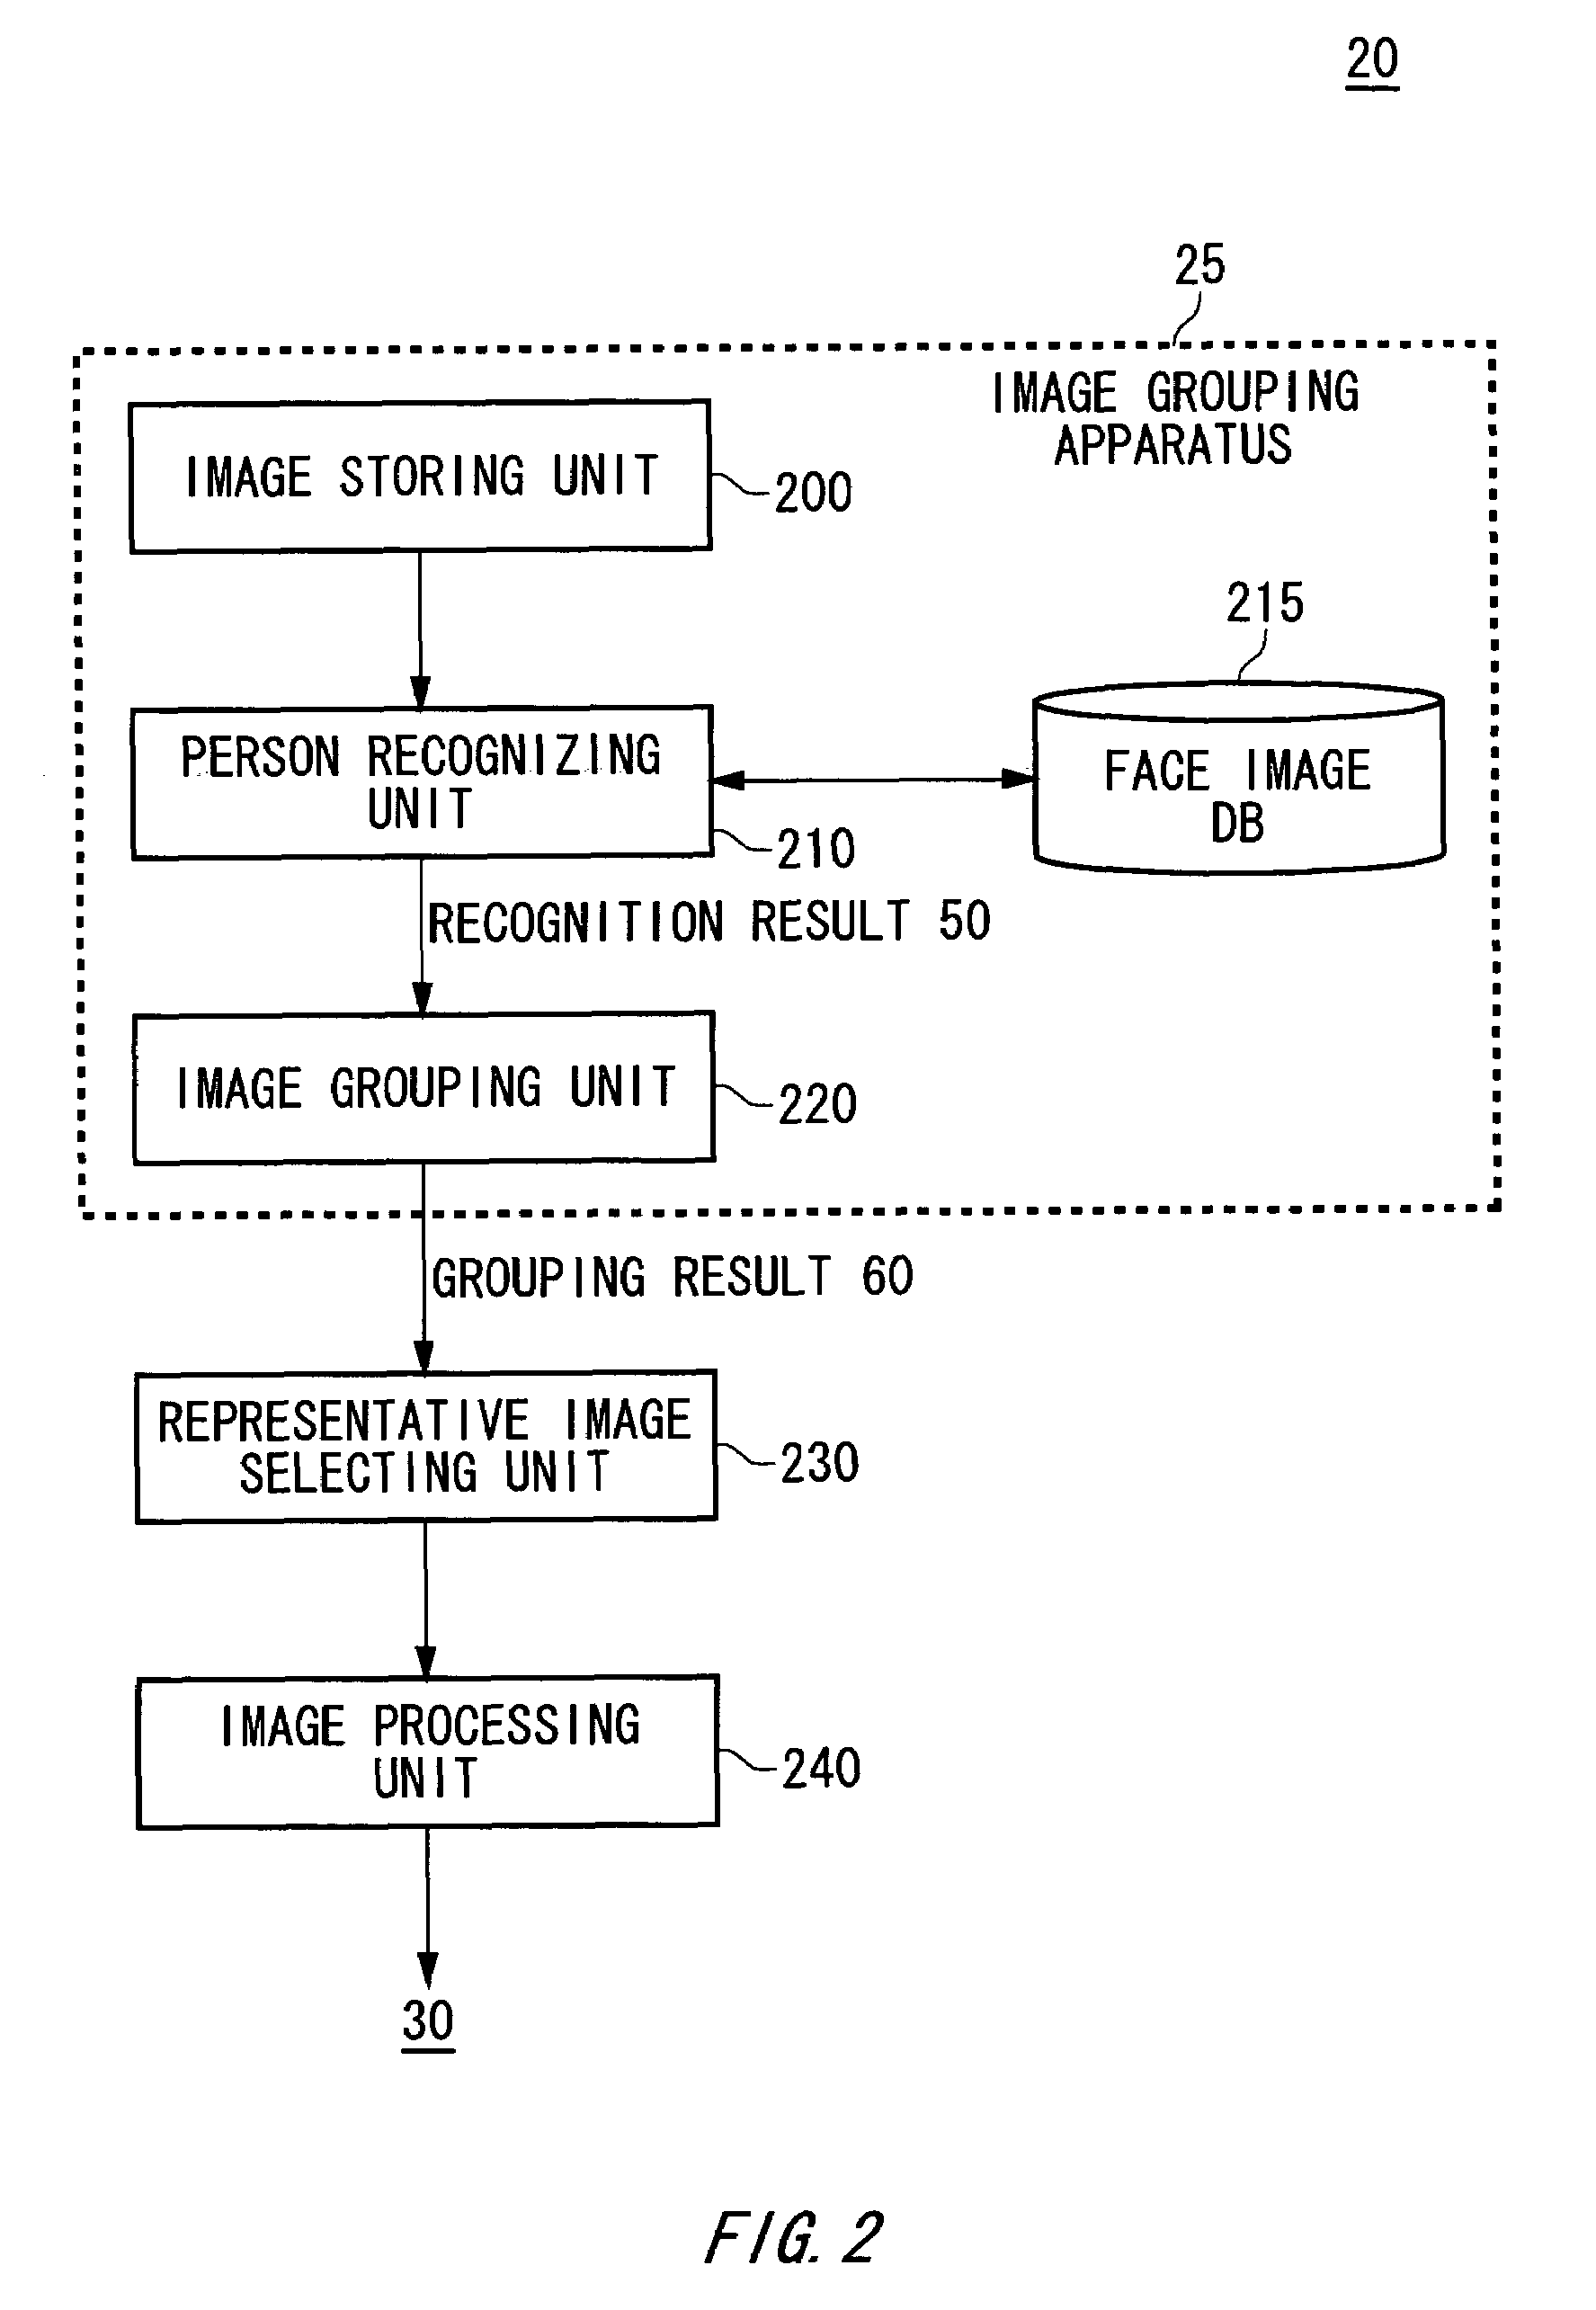 Electronic album display system, an image grouping apparatus, an electronic album display method, an image grouping method, and a machine readable medium storing thereon a computer program